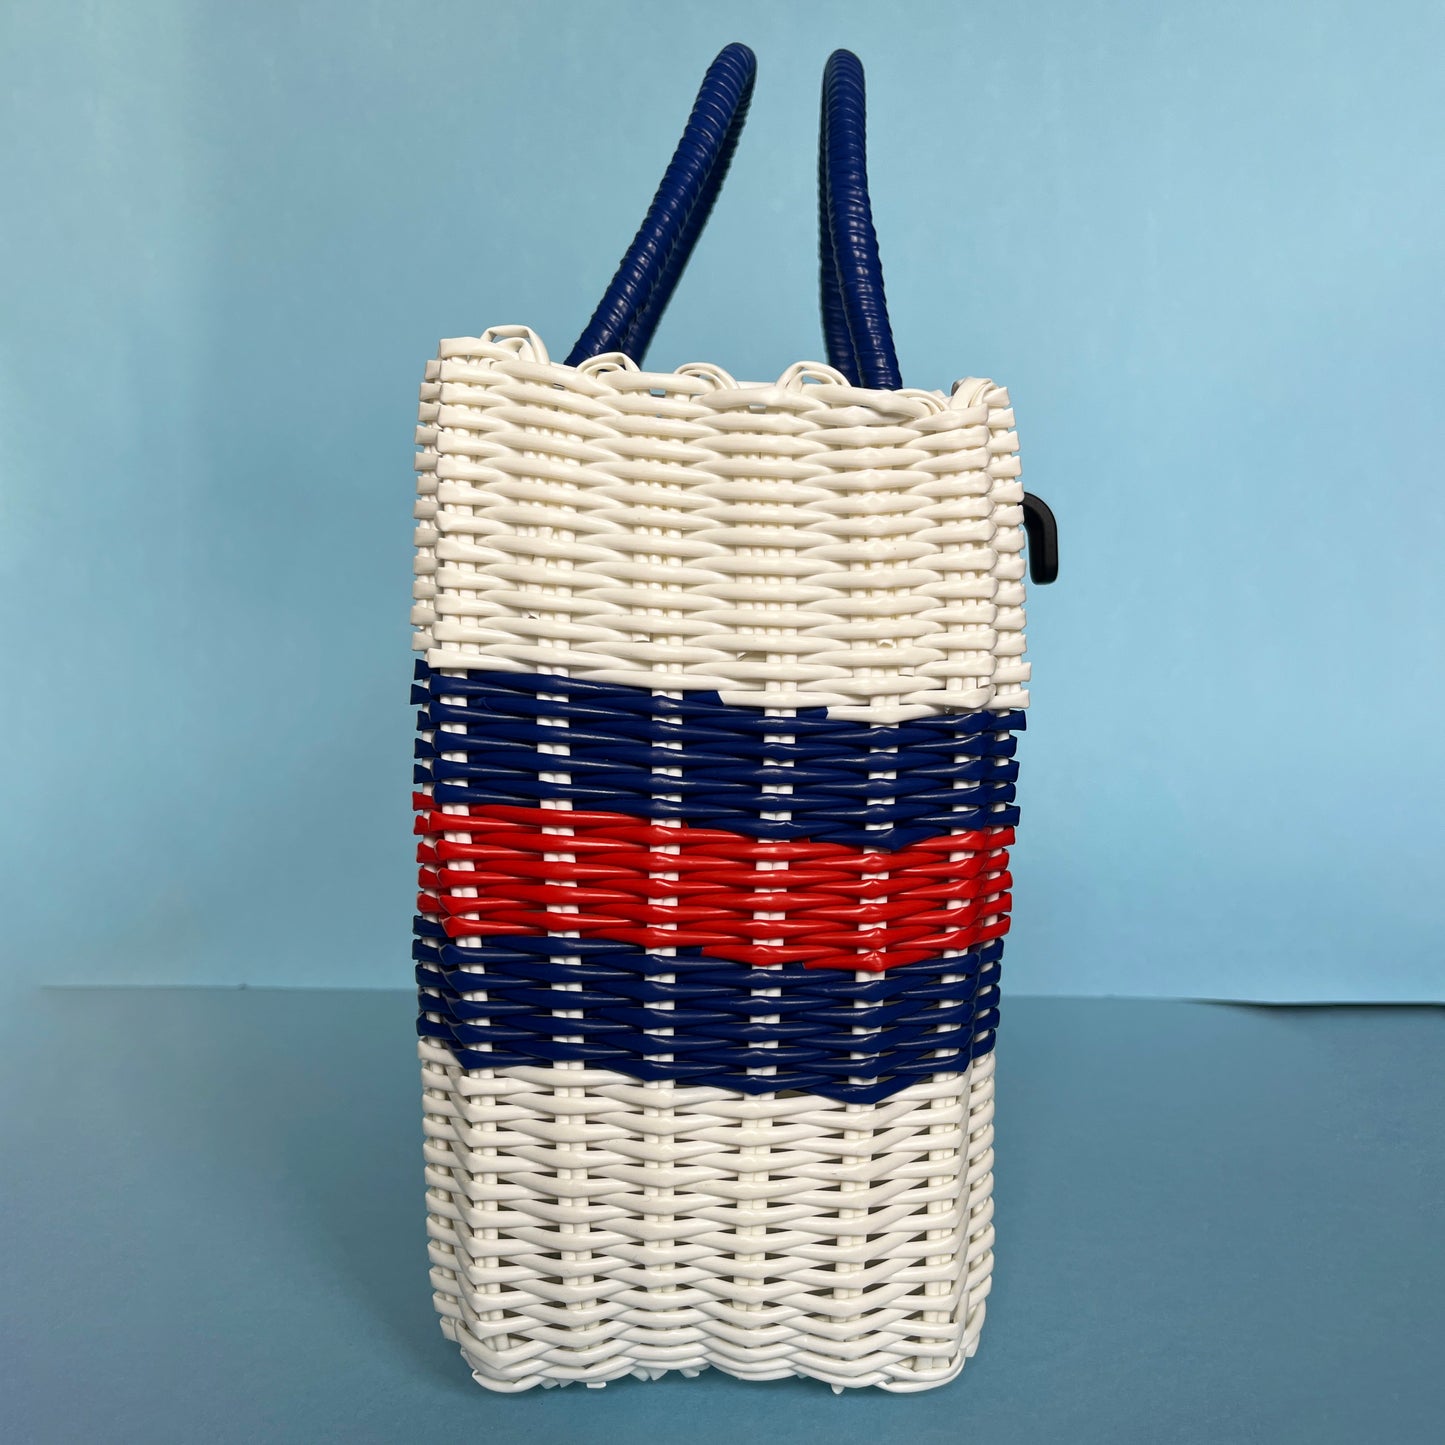 side view red white and blue woven pannier baskets spring basket bag